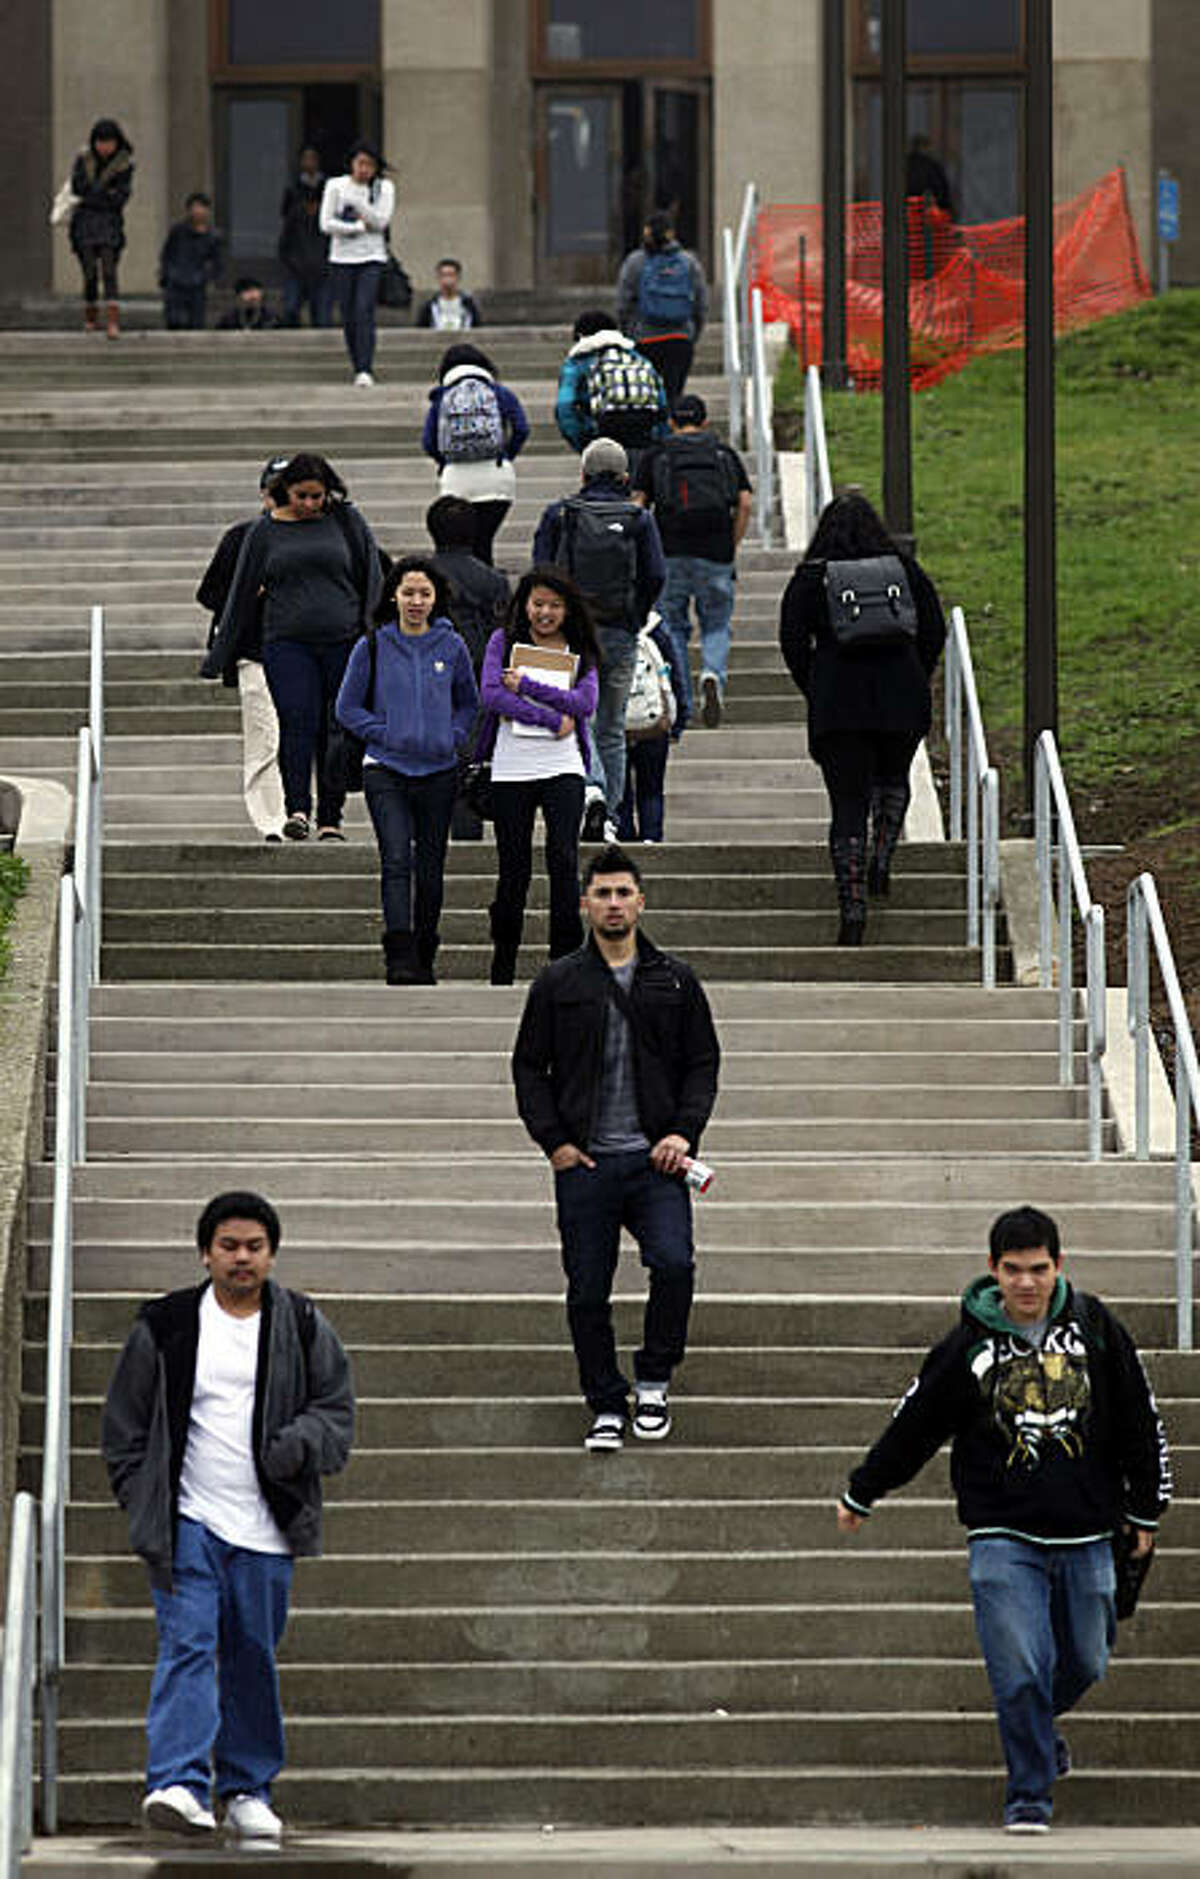 City College of San Francisco students move about campus on Monday January 31, 2010 in San Francisco, Calif. In recent years, because of a growing population of students, incoming freshman have found it difficult to get into basic core classes doing their first and sometime second year of school. A new "pilot" program has been recently introduced to streamline and prioritizes admittance into core classes for a certain croup of incoming San Francisco students.